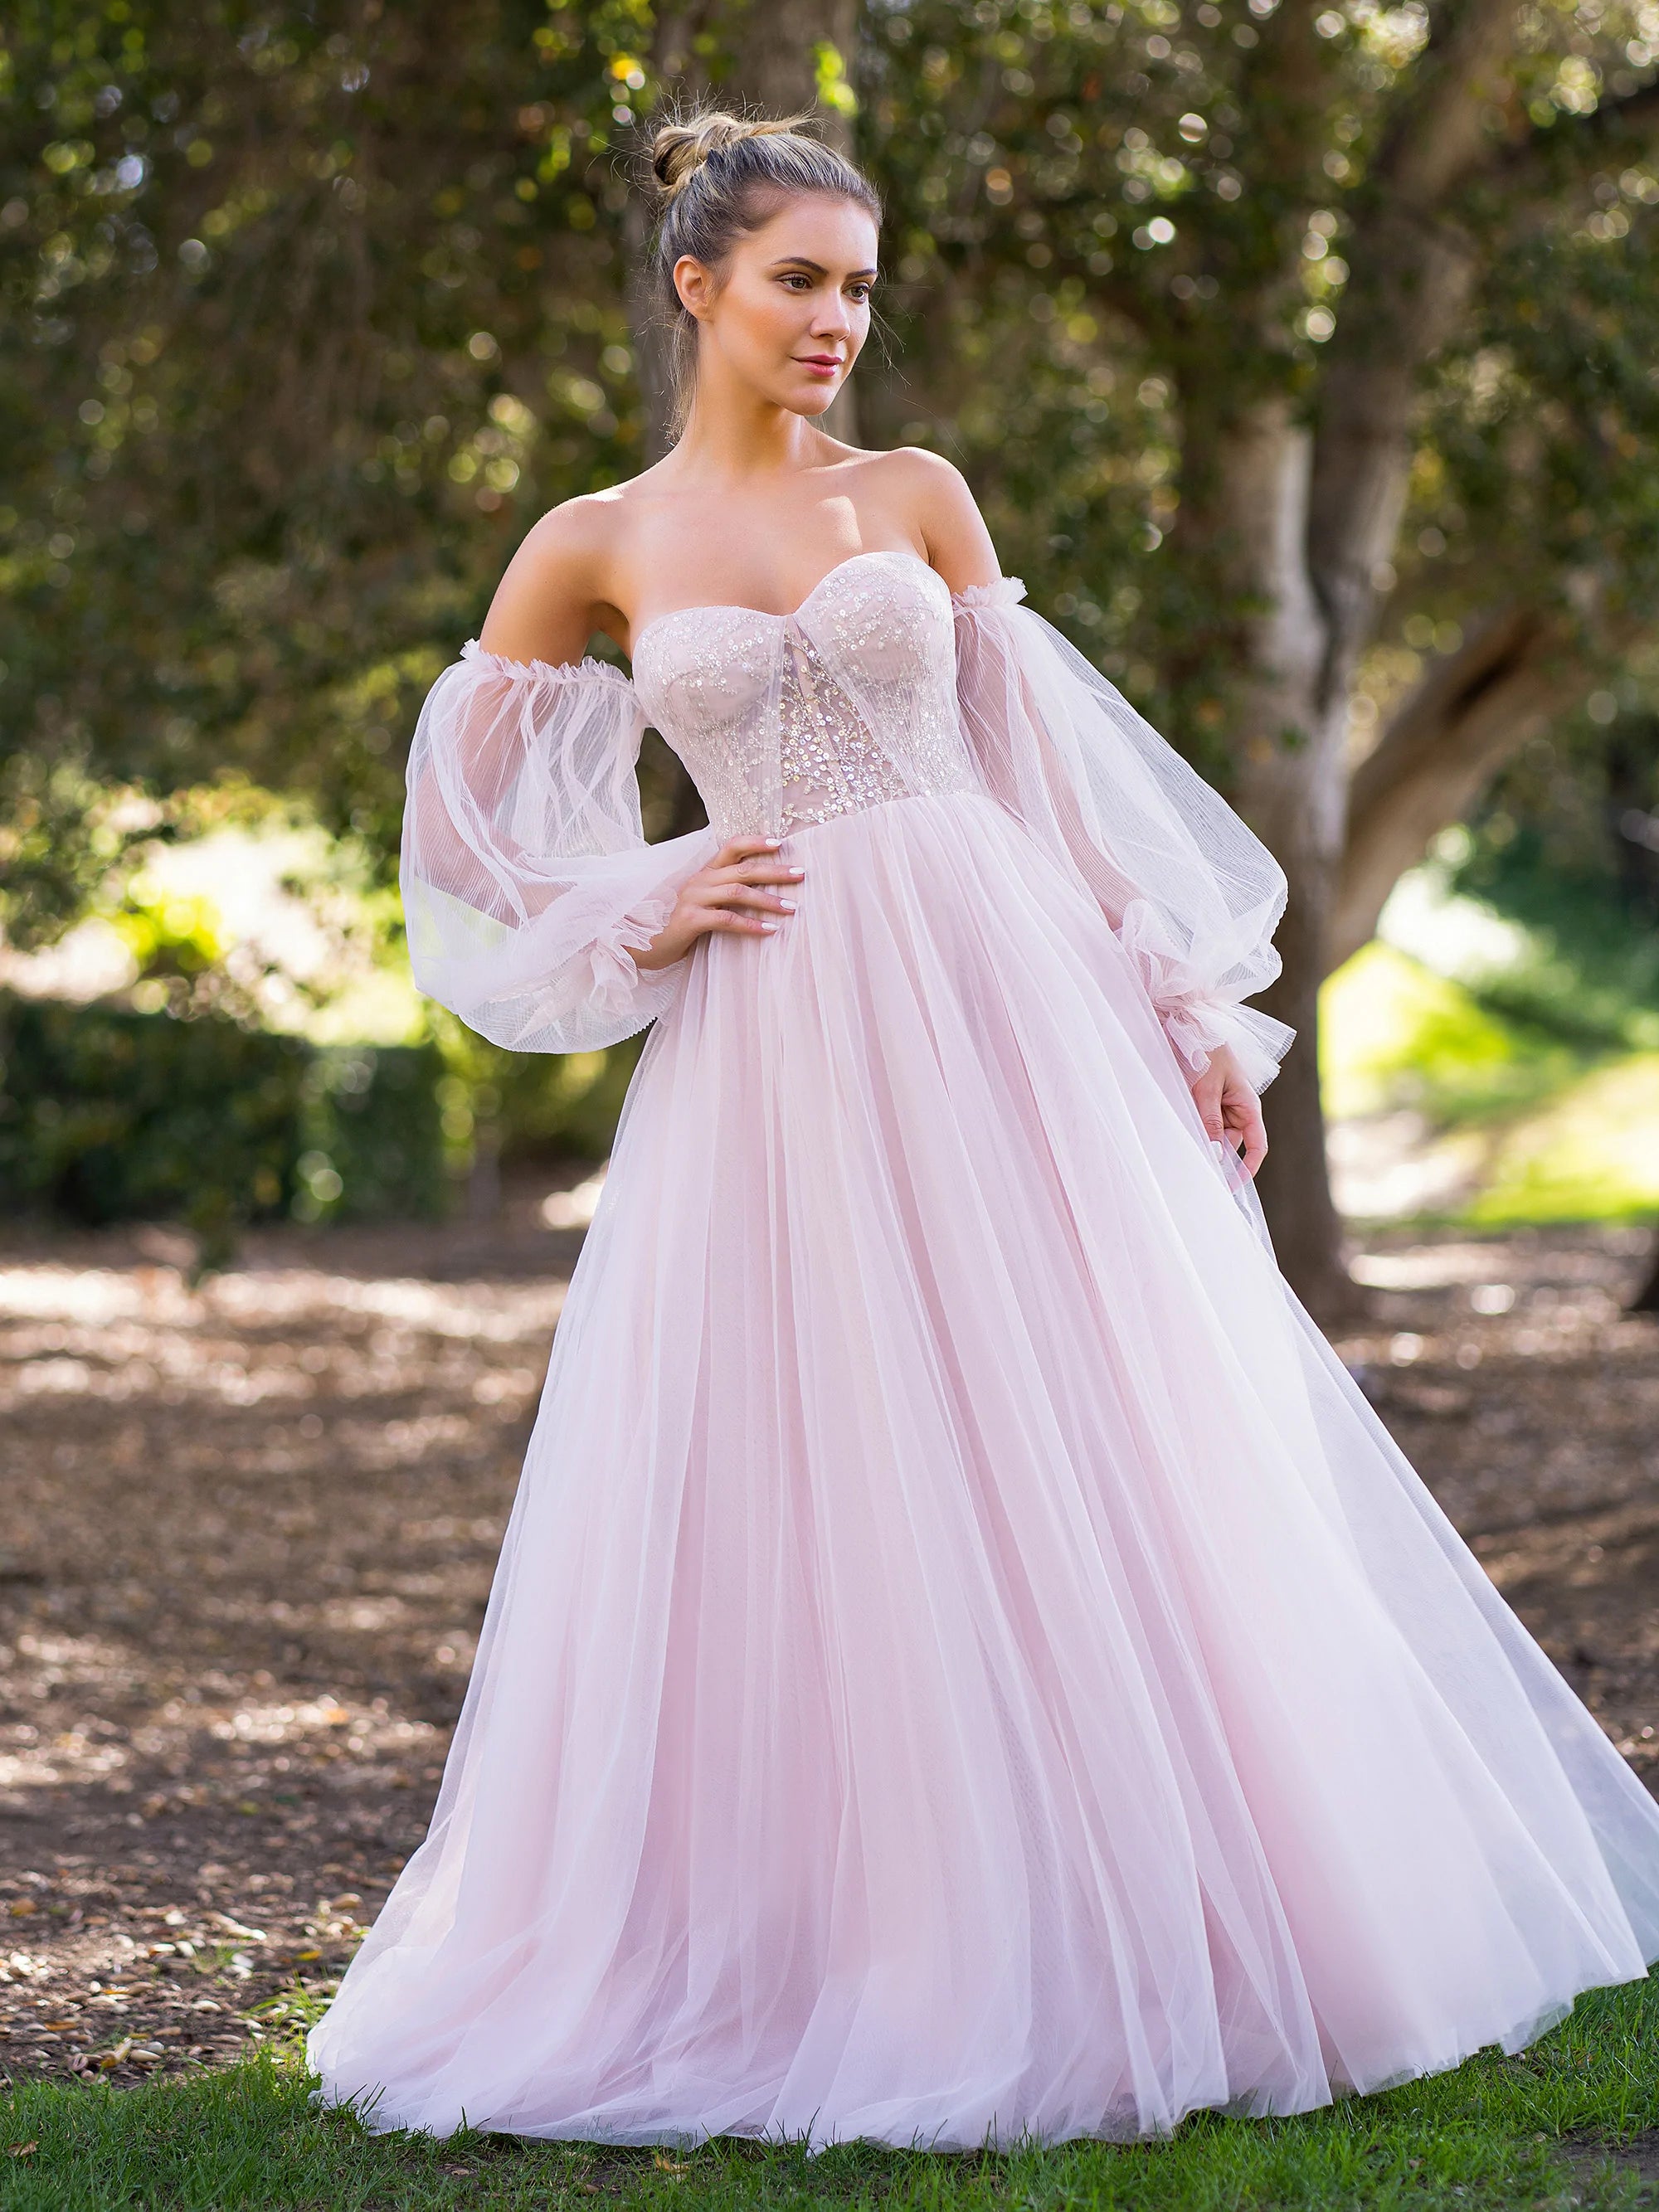 A-line Corset Off The Shoulder Floor Length Tulle Prom Dress with lace